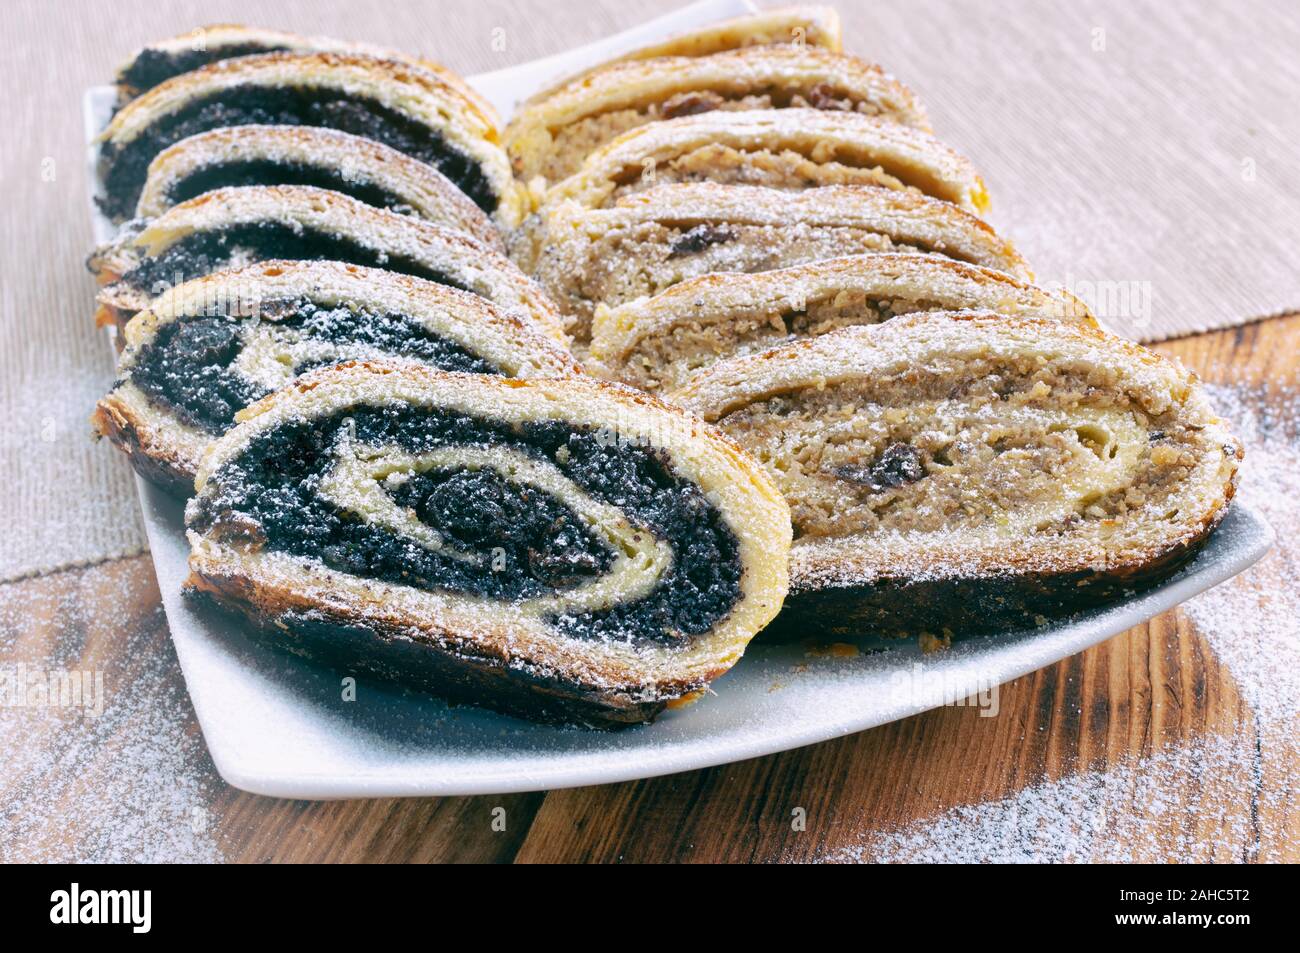 Poppy seed roll and wallnut roll on wooden table Stock Photo